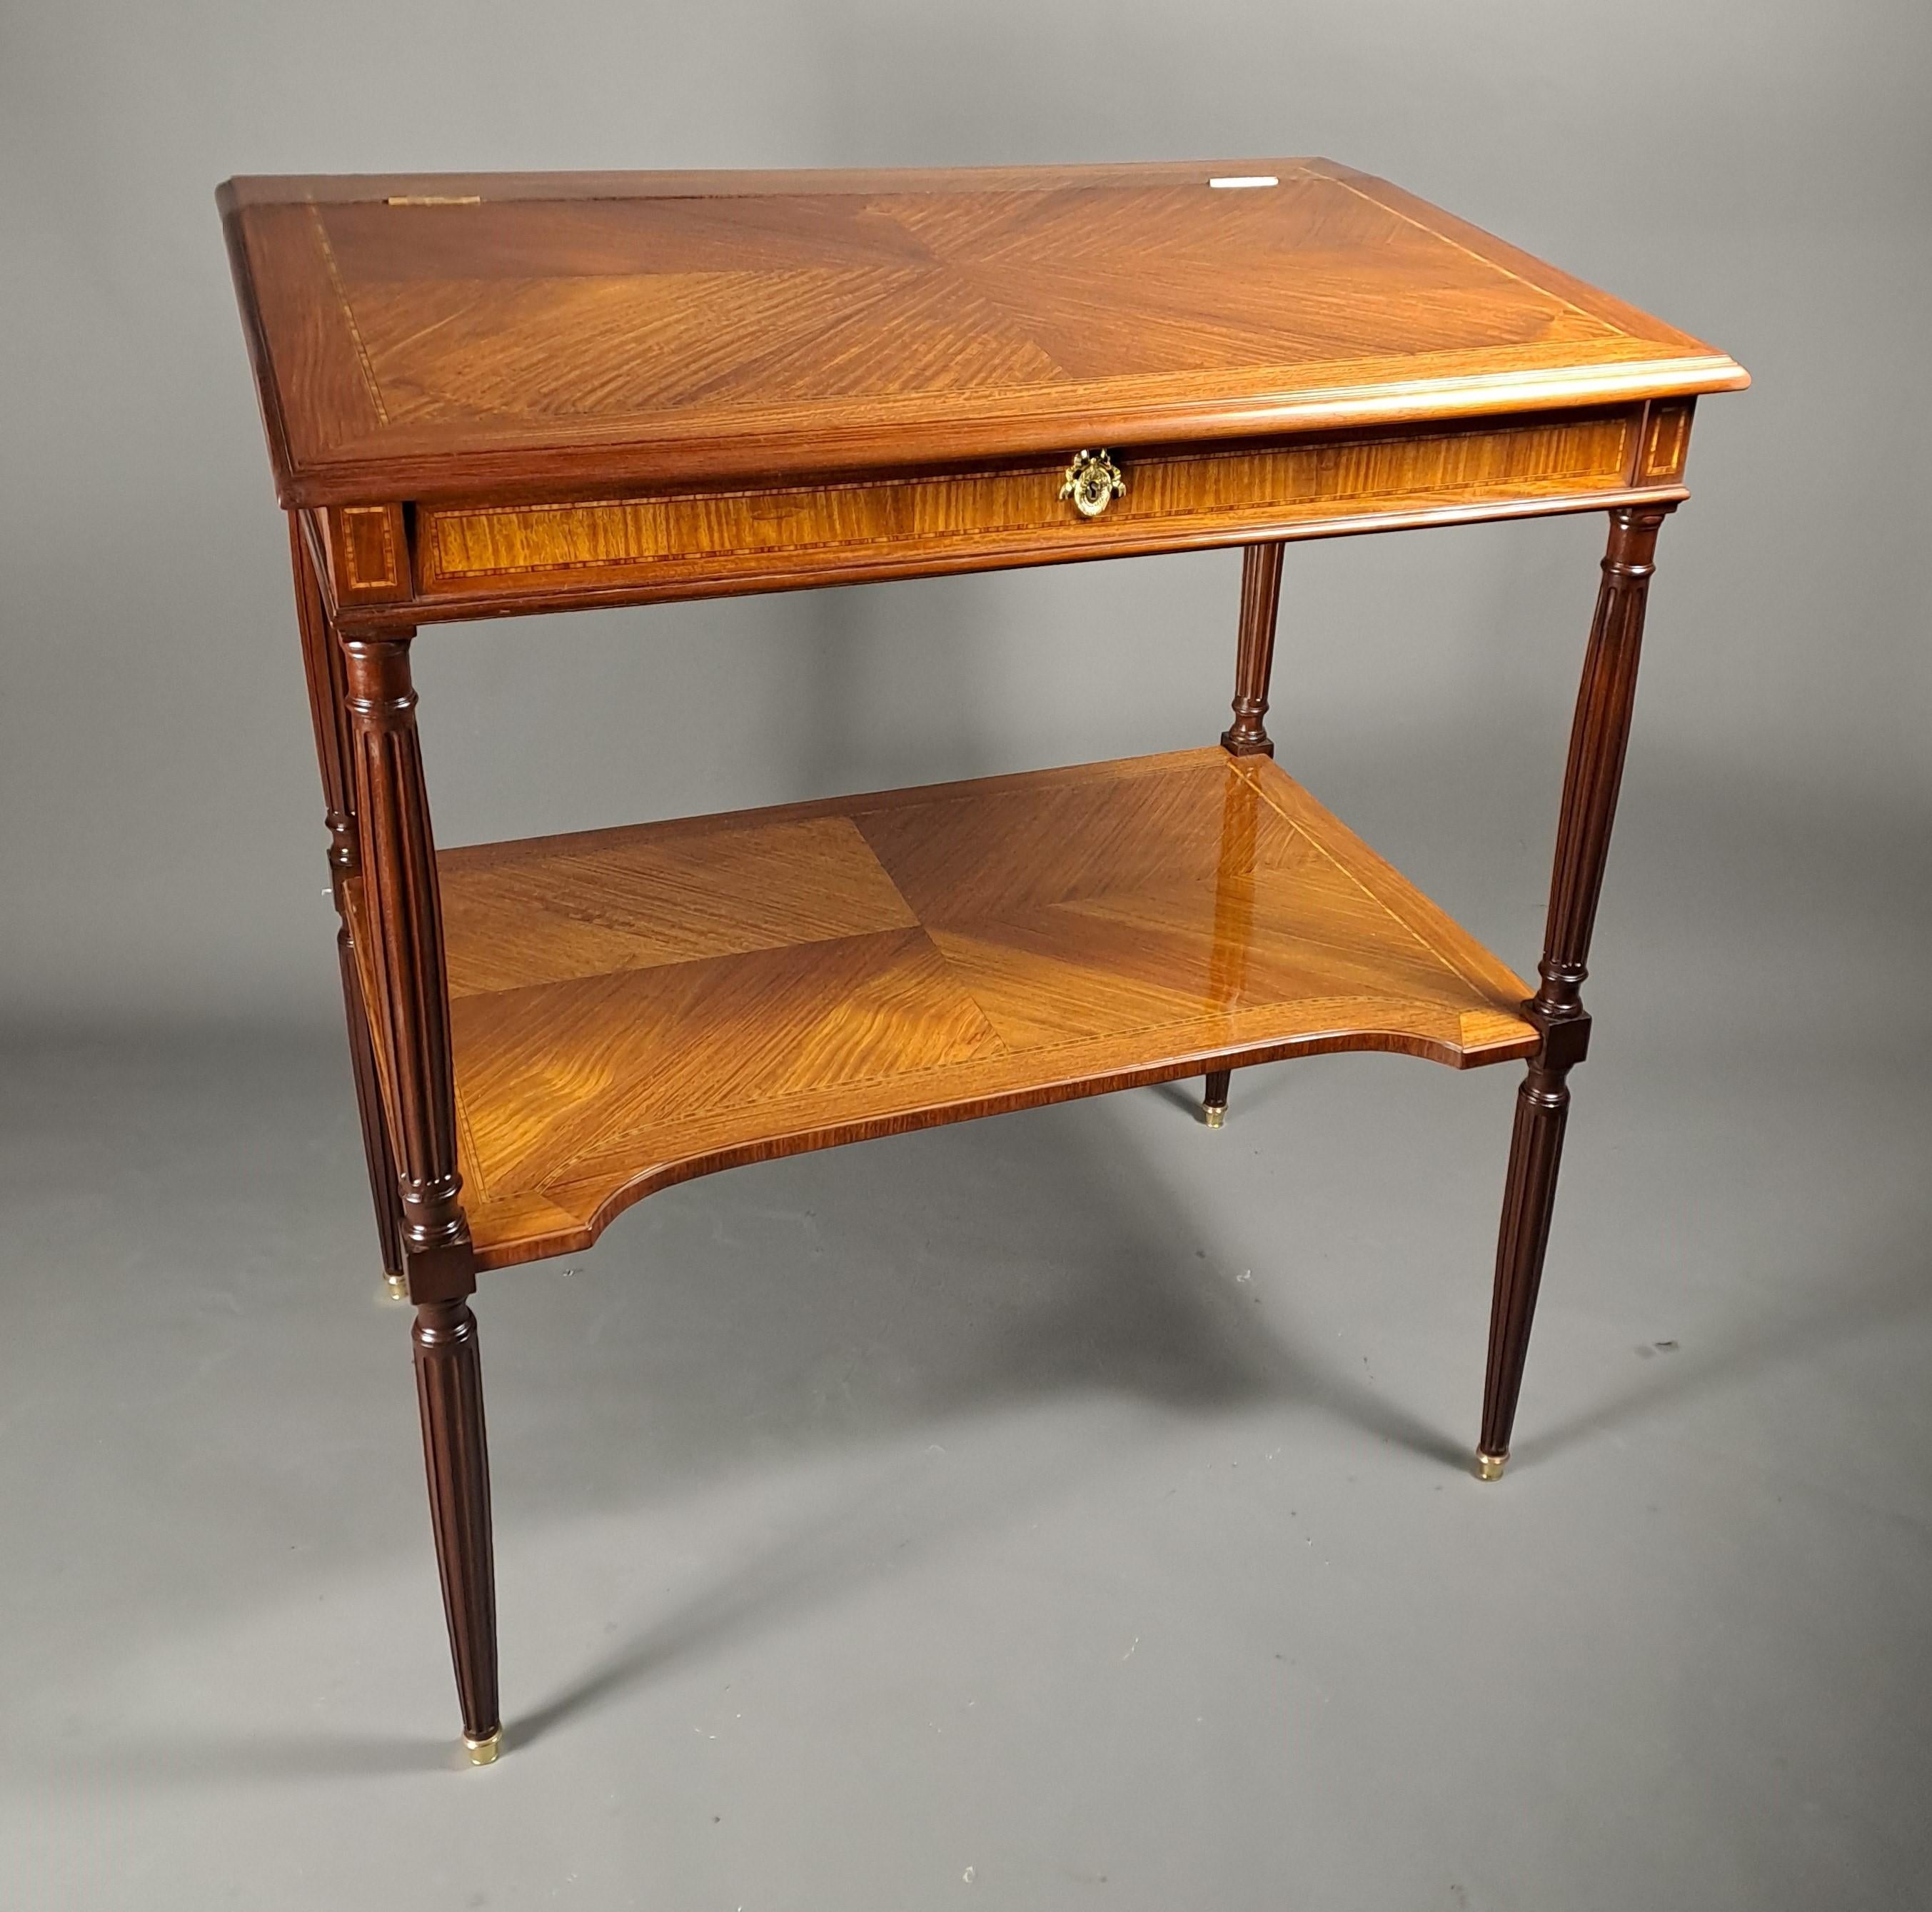 Rare Louis XVI style notary writing desk made of mahogany frieze marquetry and light wood and rosewood fillet friezes.

Four solid mahogany fluted legs joined by a spacer shelf.

French work of very good quality. Ideal piece of furniture for a